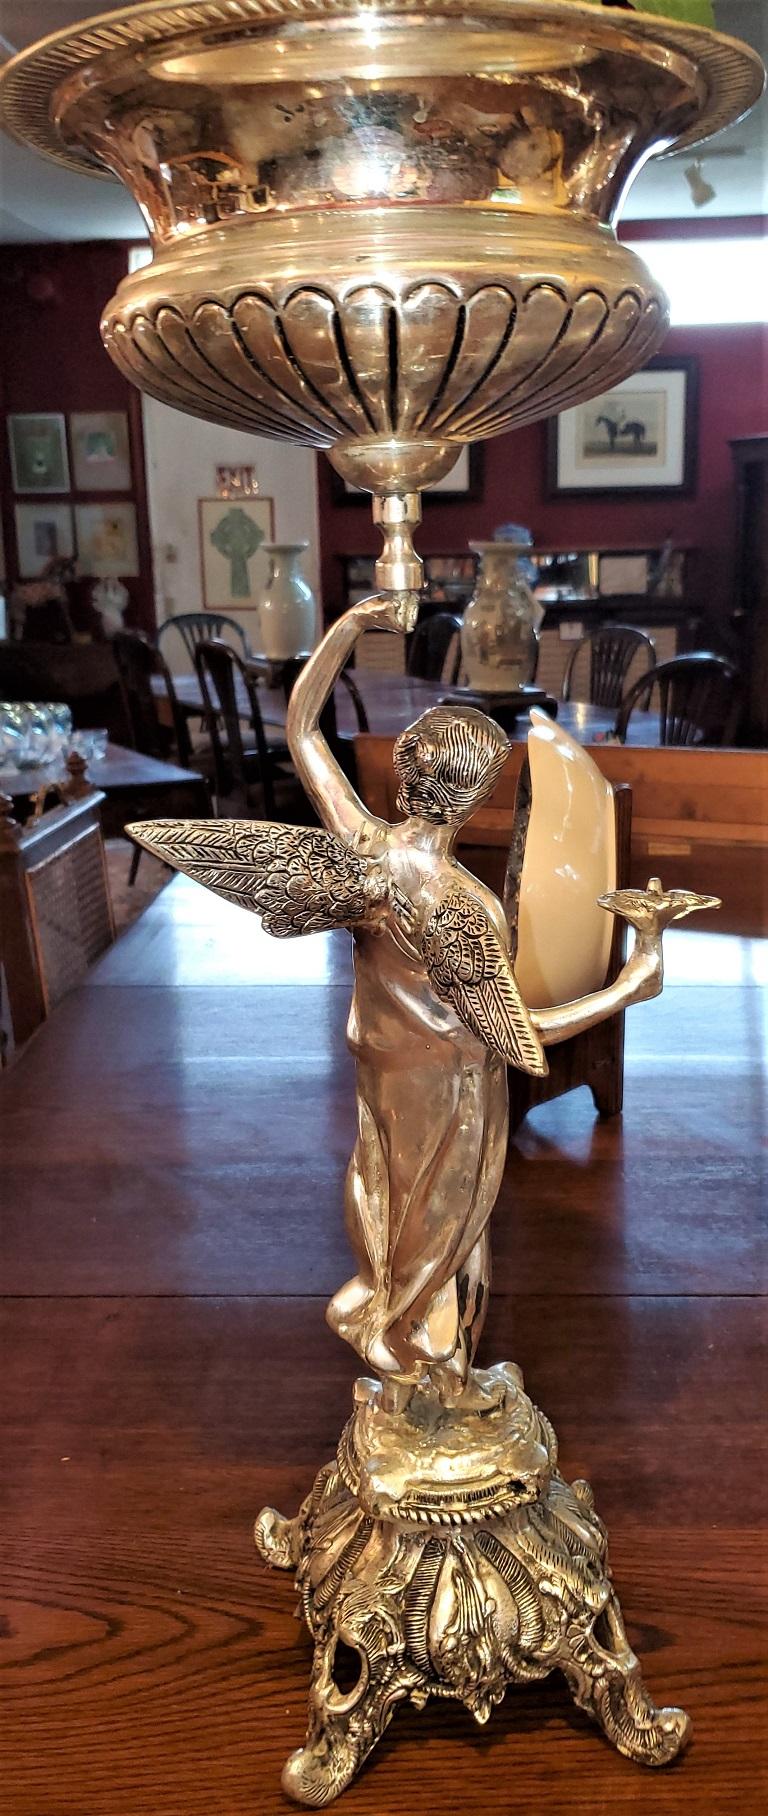 Presenting a lovely pair of chromed angel centrepieces.

Featuring a pair of female angels with wings and holding a bird in their right hand. Standing on ornate pedestals on 4 feet and holding aloft a centerpiece bowl/urn in their left hand. Each